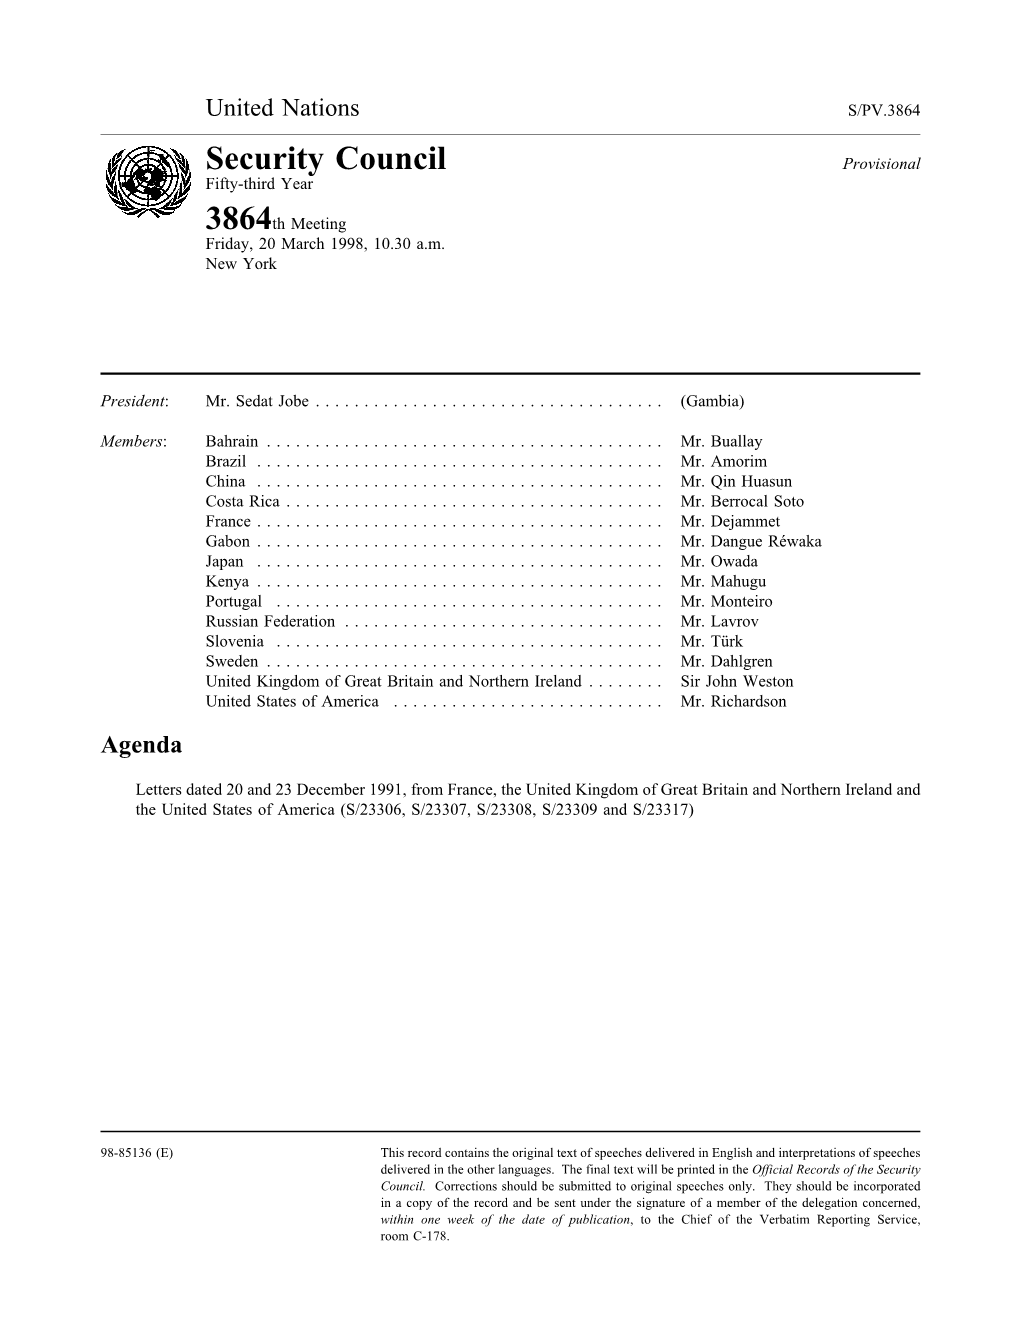 Security Council Provisional Fifty-Third Year